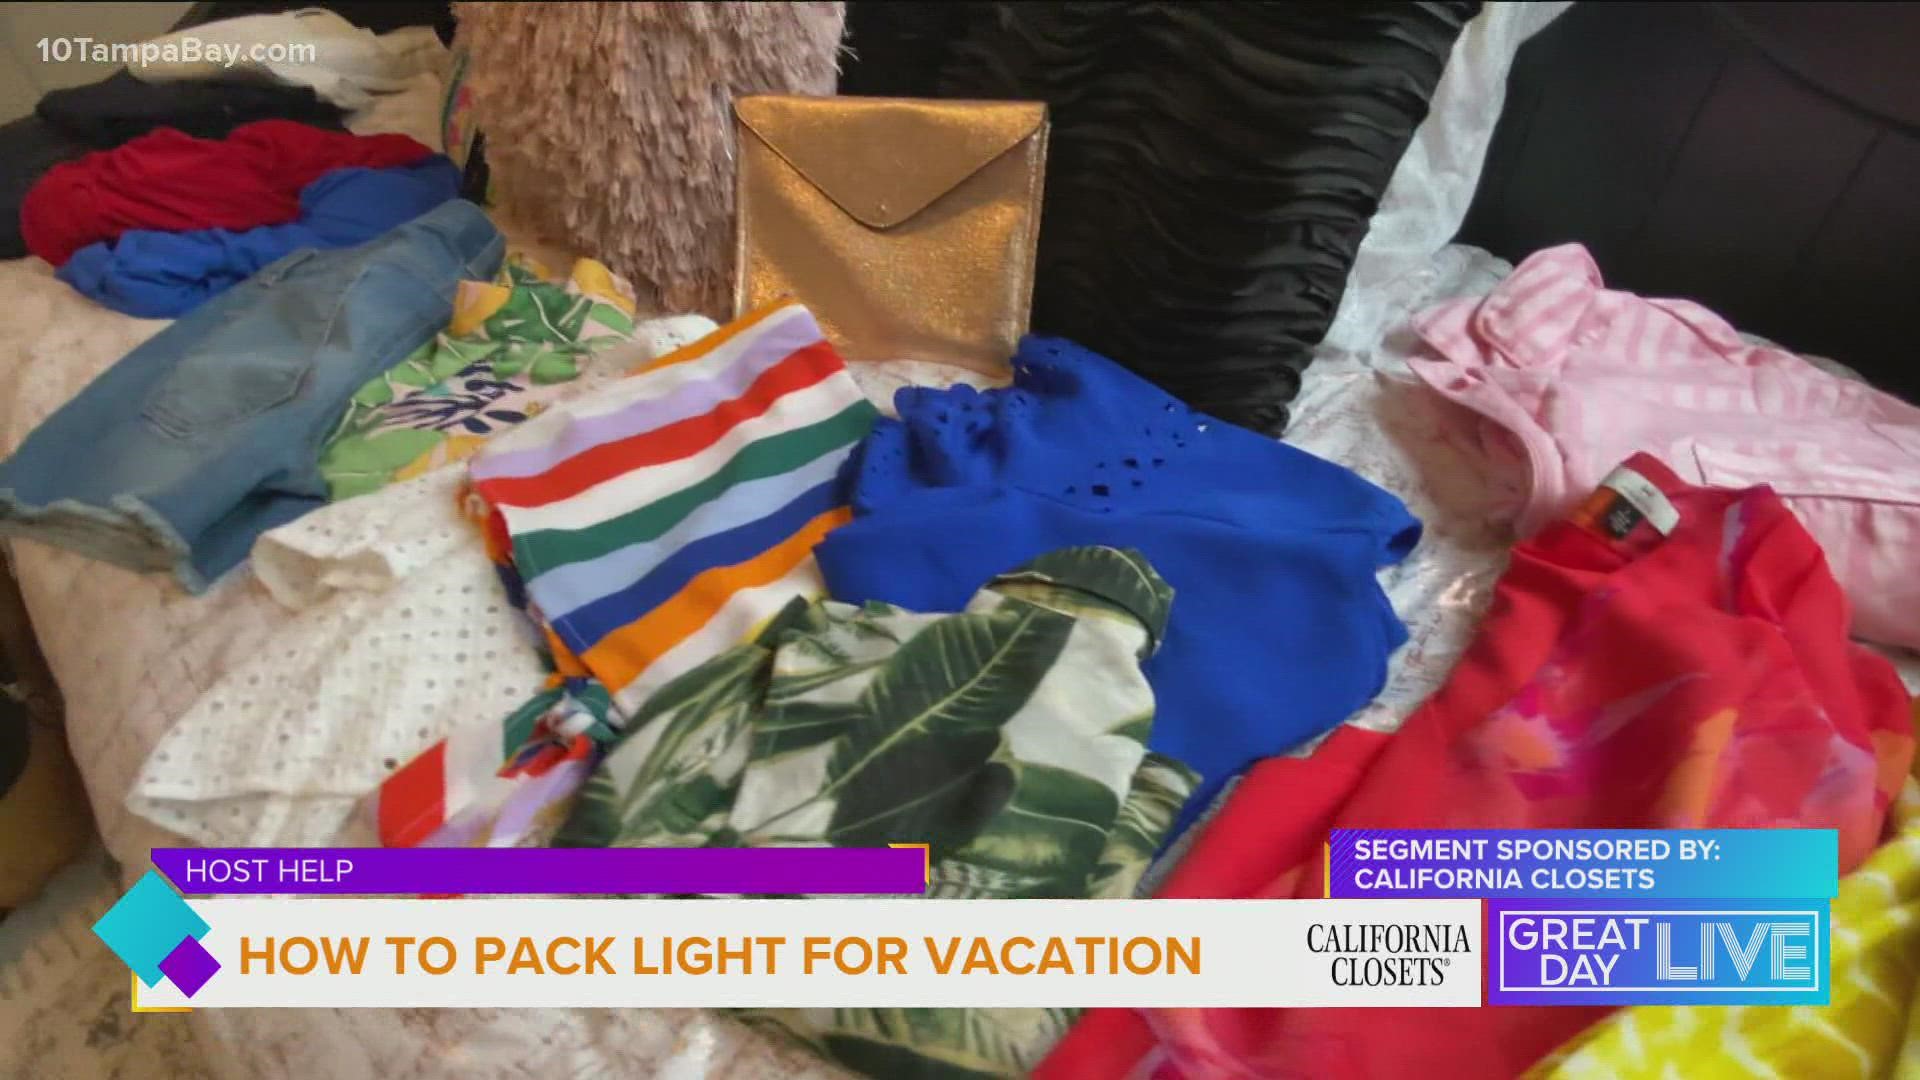 In this week's host help sponsored by California Closets, Java shares tips for packing light